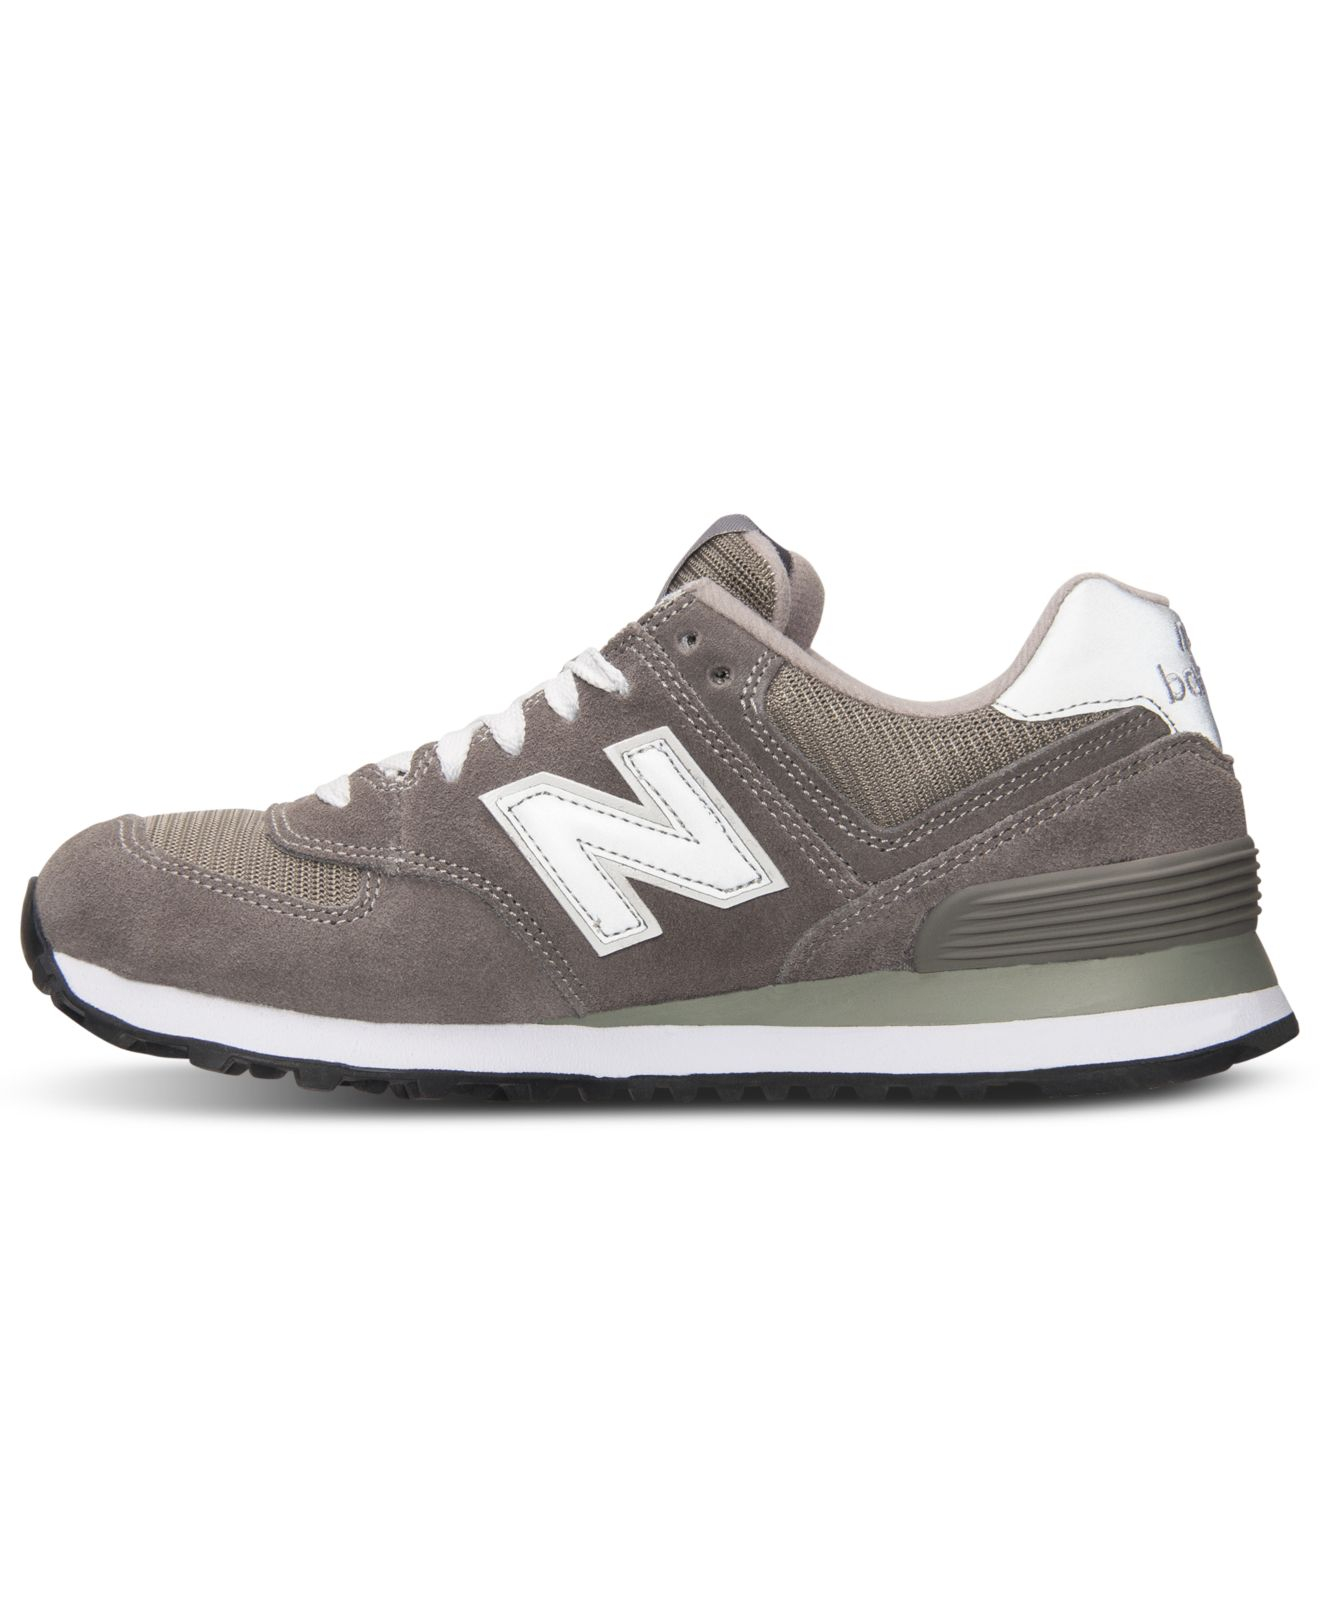 Lyst - New Balance Women's 574 Core Casual Sneakers From Finish Line in ...